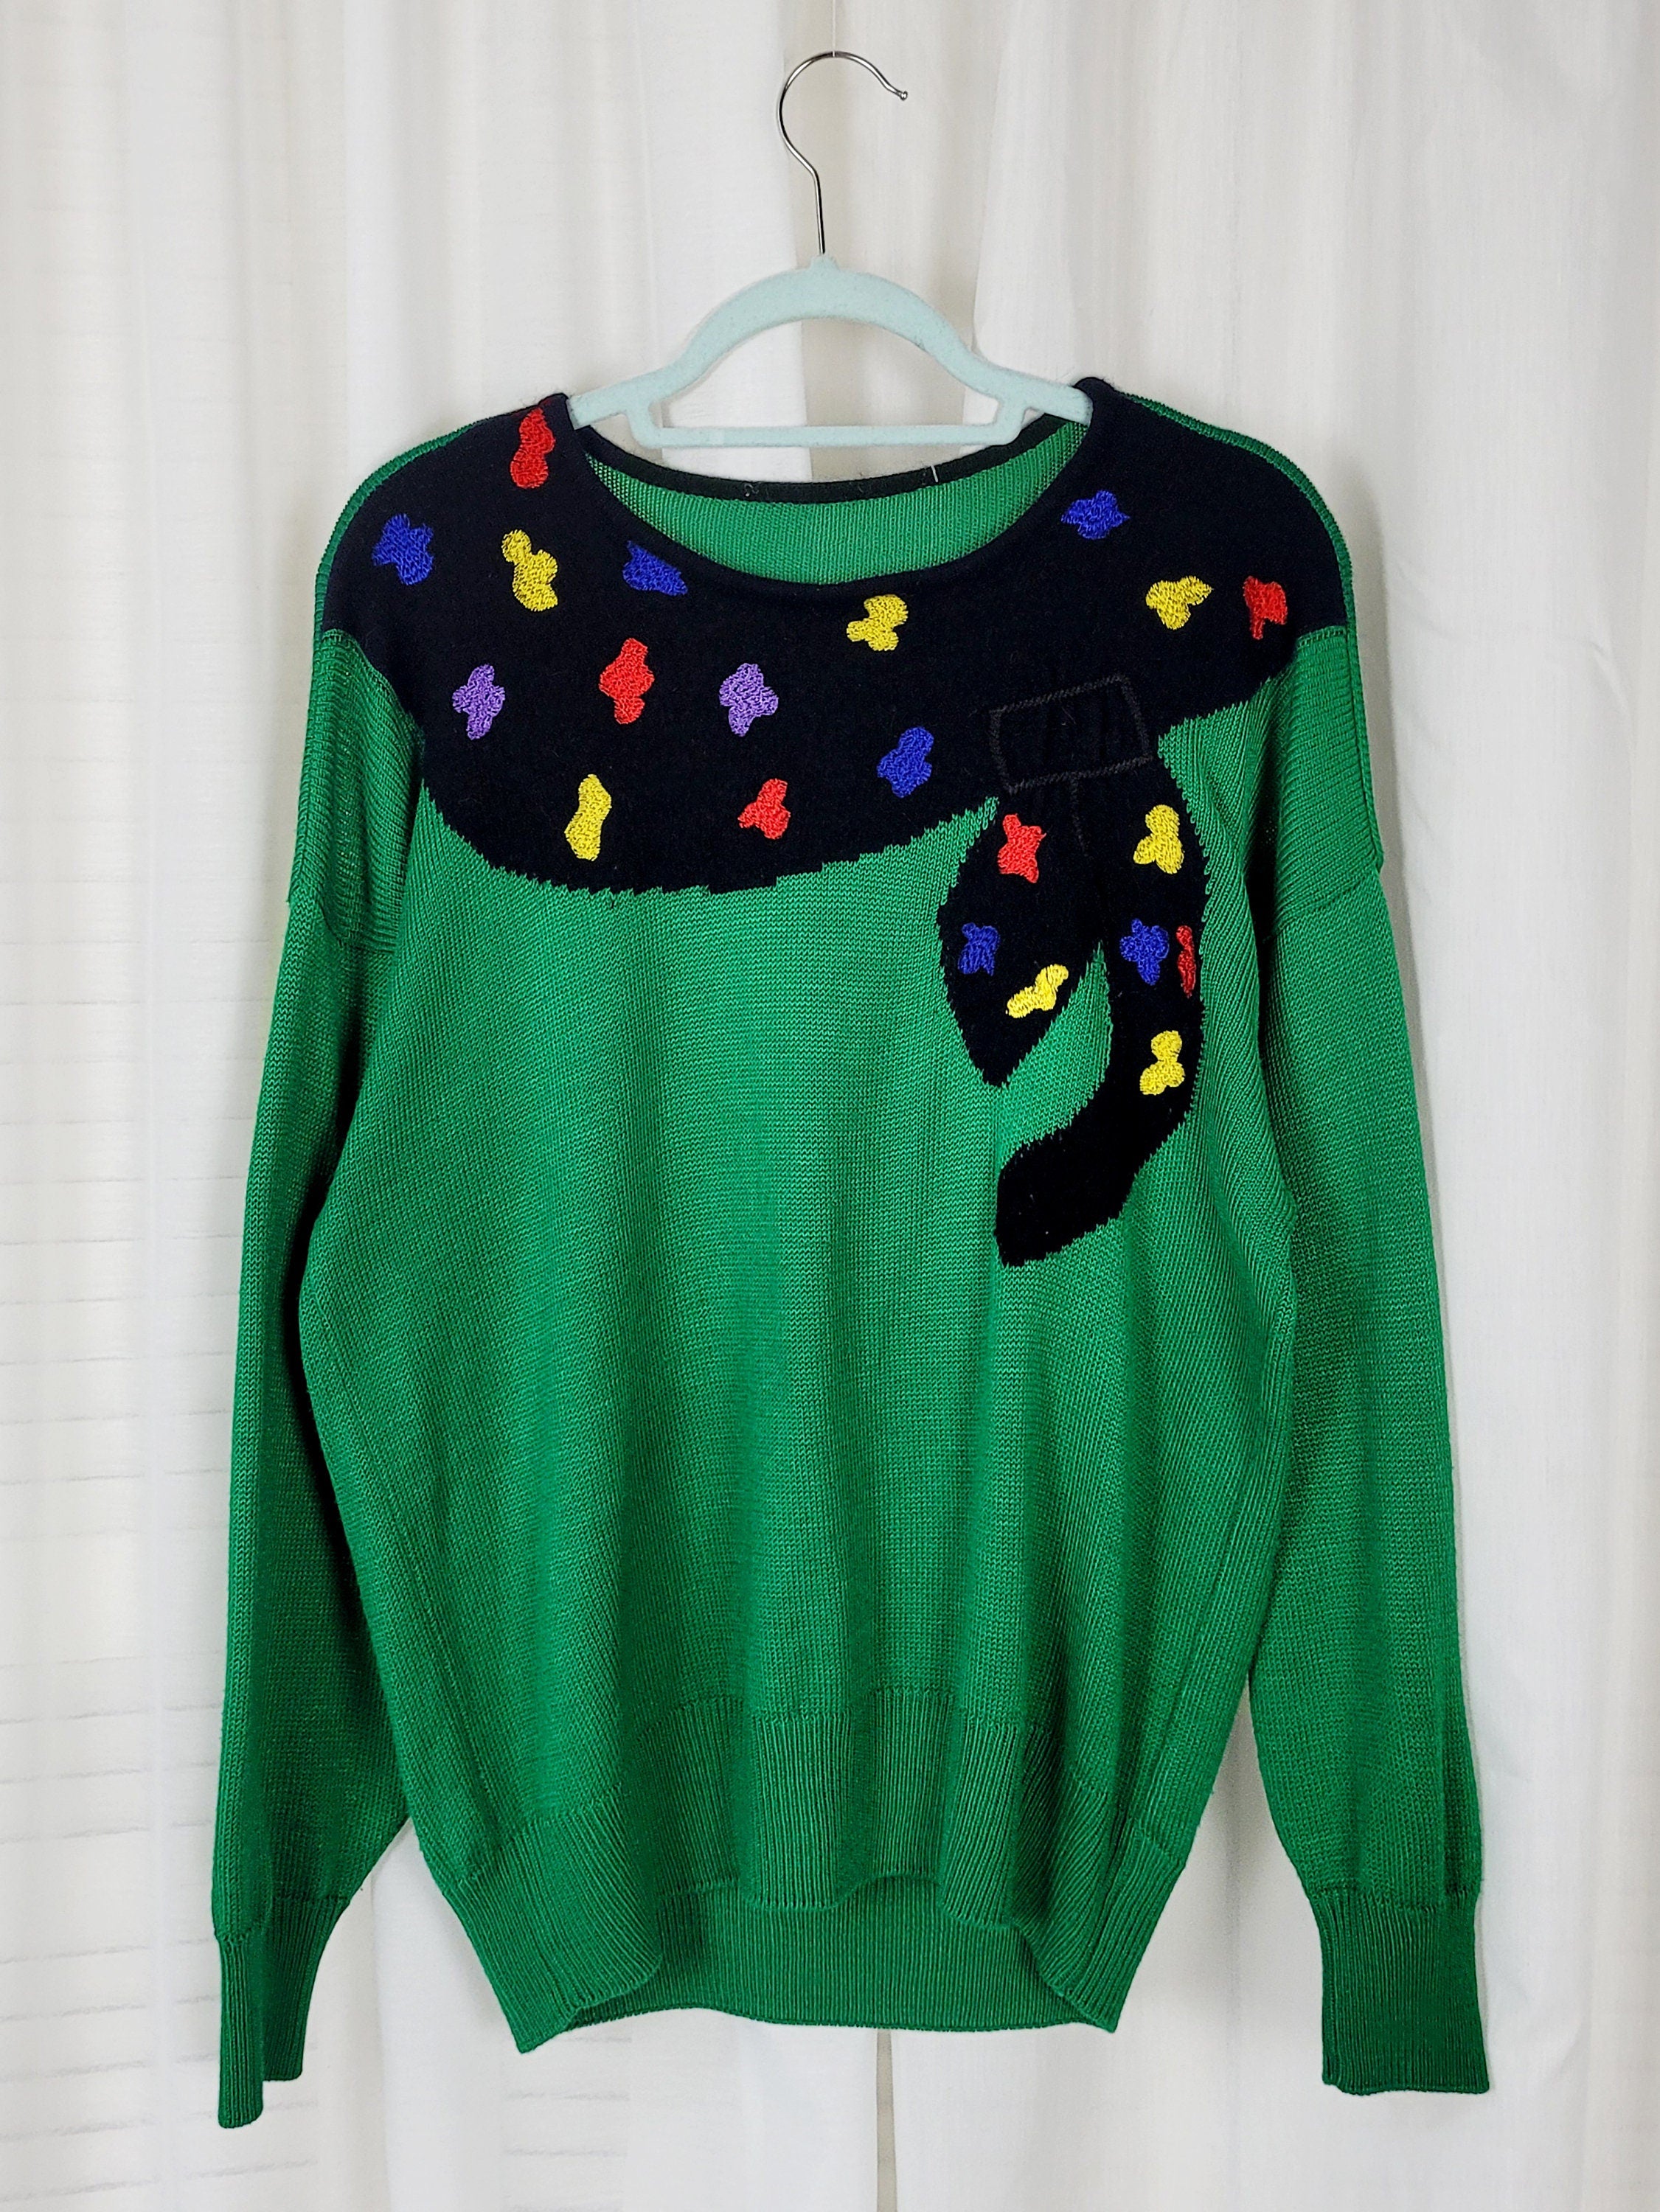 Vintage 80s green embroidery oversize Moms sweater